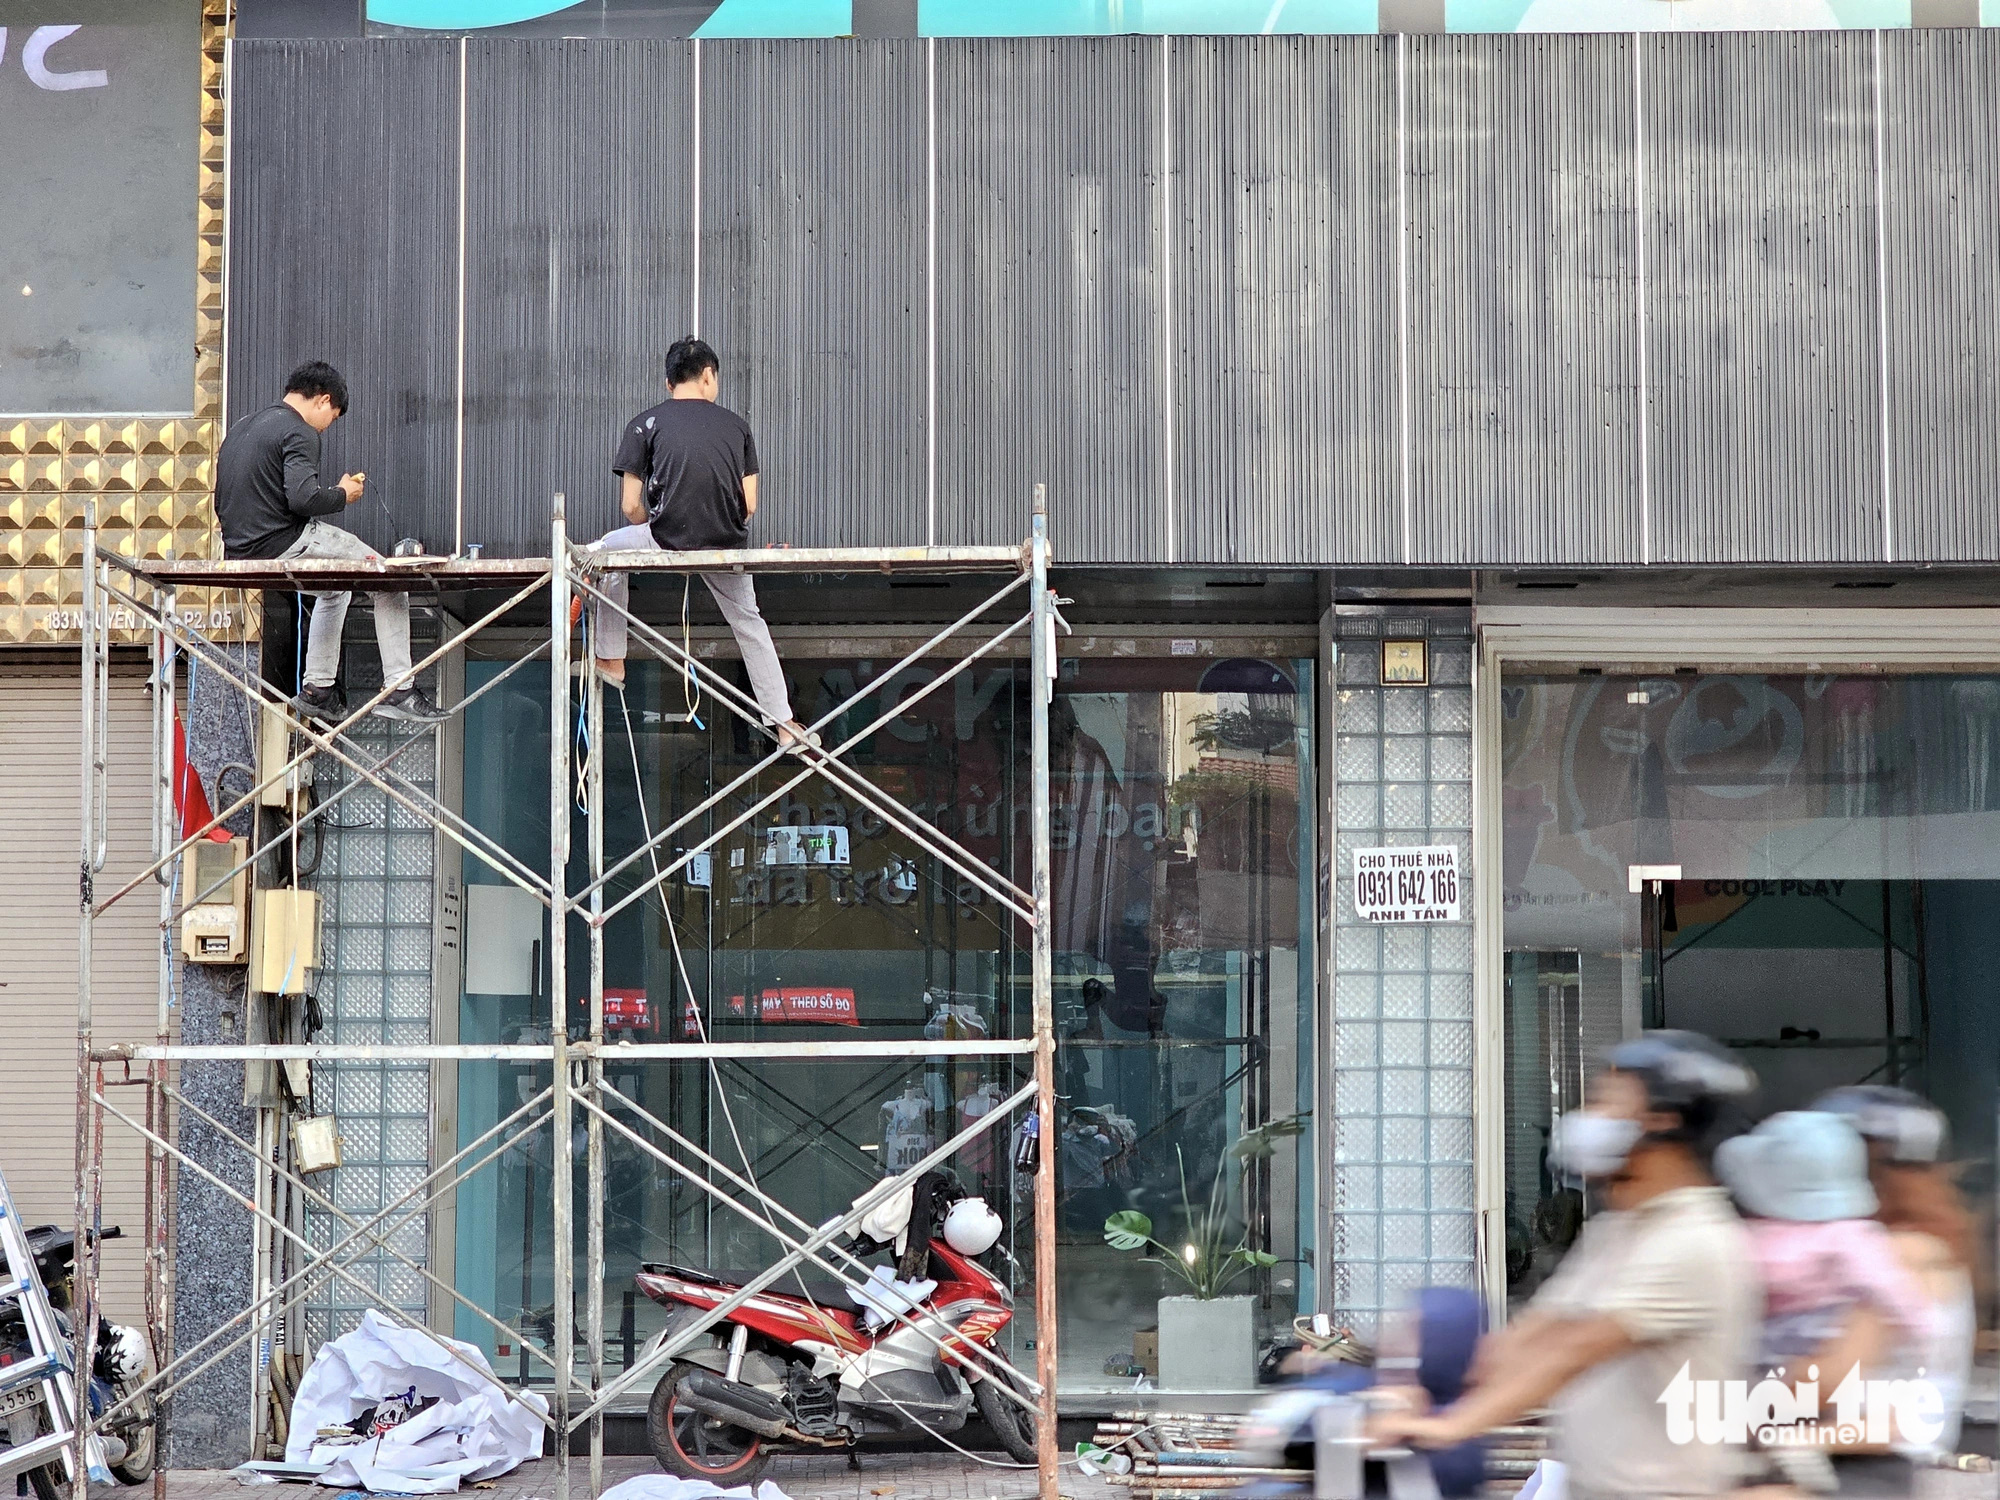 Amidst closed stores, a new shop undergoes renovation to enter the challenging market in downtown Ho Chi Minh City. Photo: Ngoc Hien / Tuoi Tre